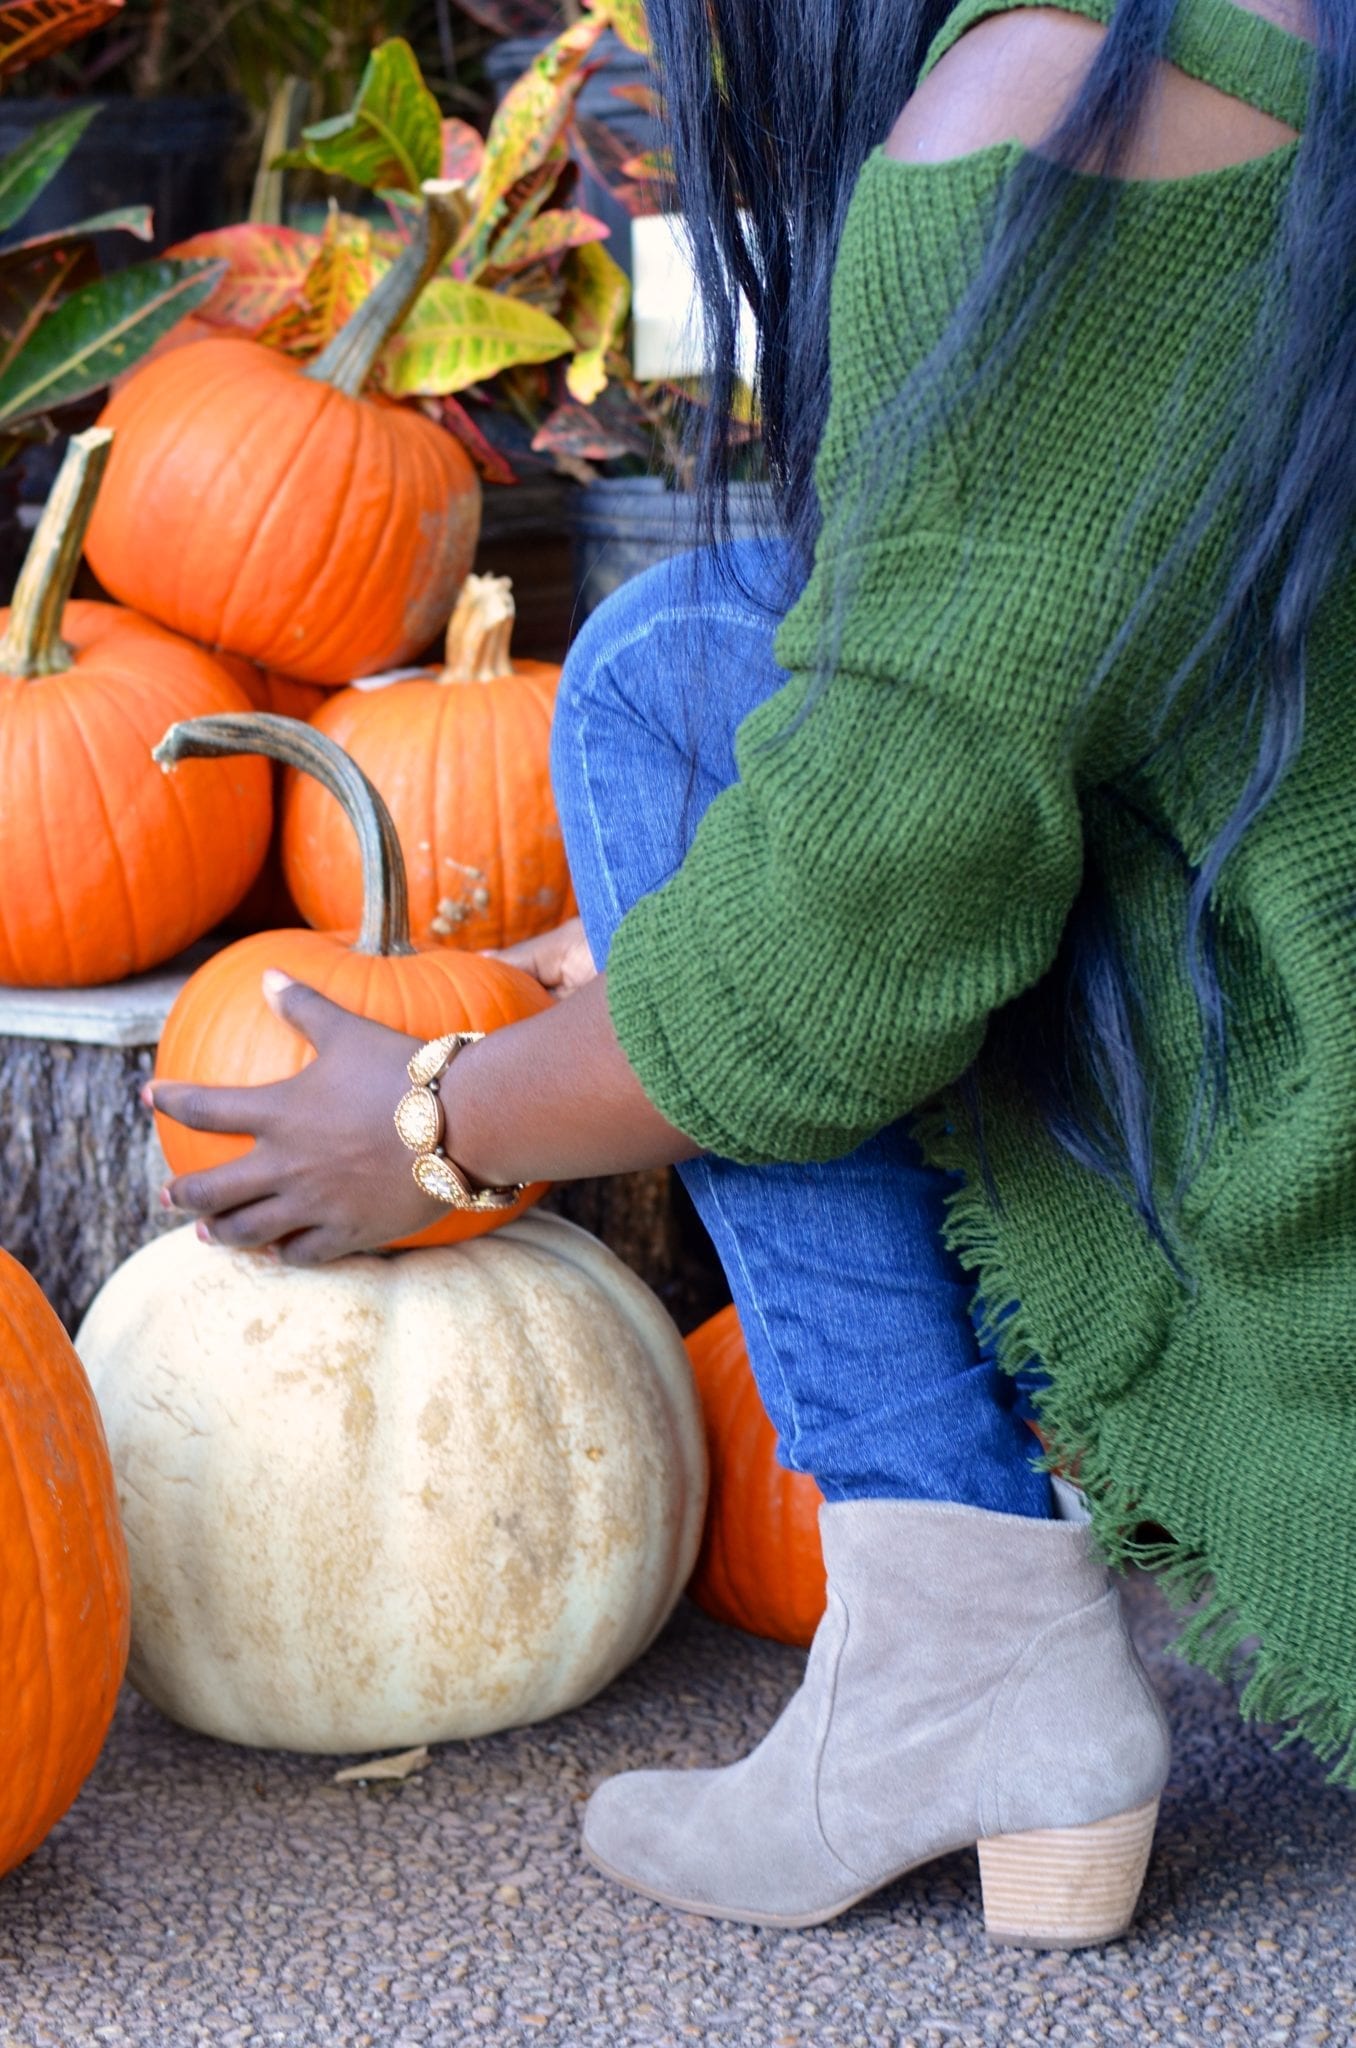 Sweaters + Sole Society Booties + Pumpkins = Fall